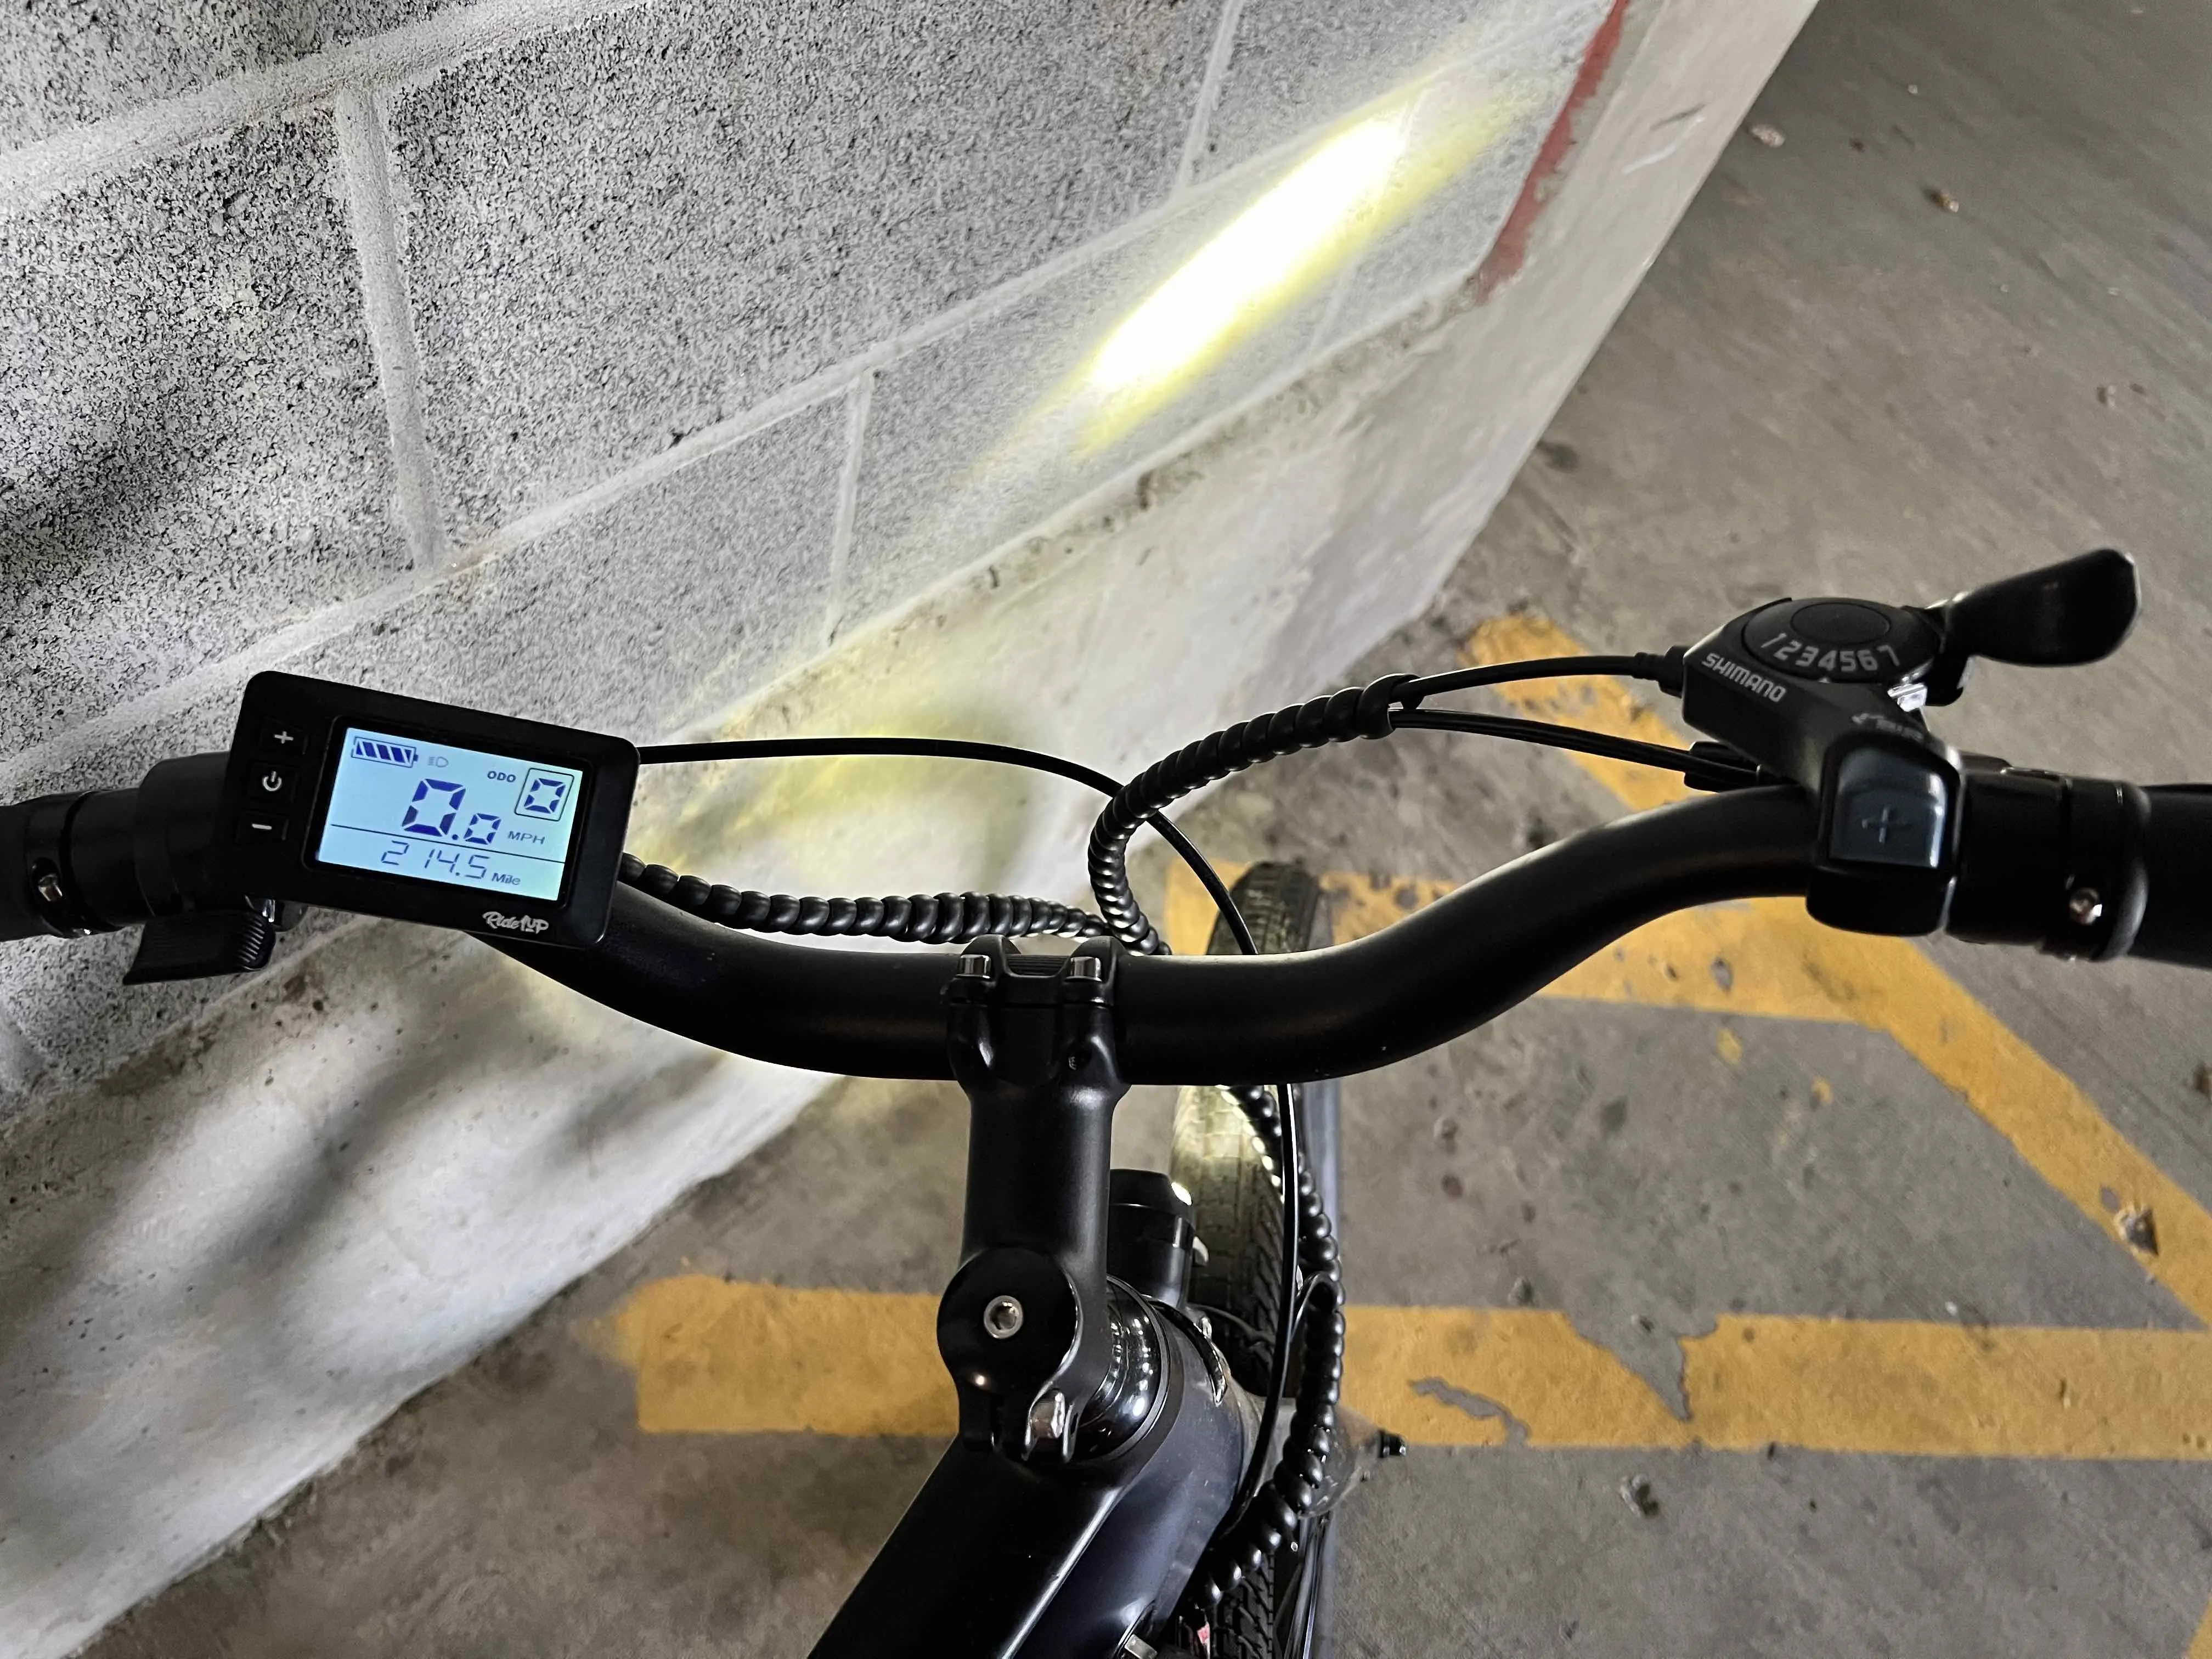 The pedal assist control panel on the ebike